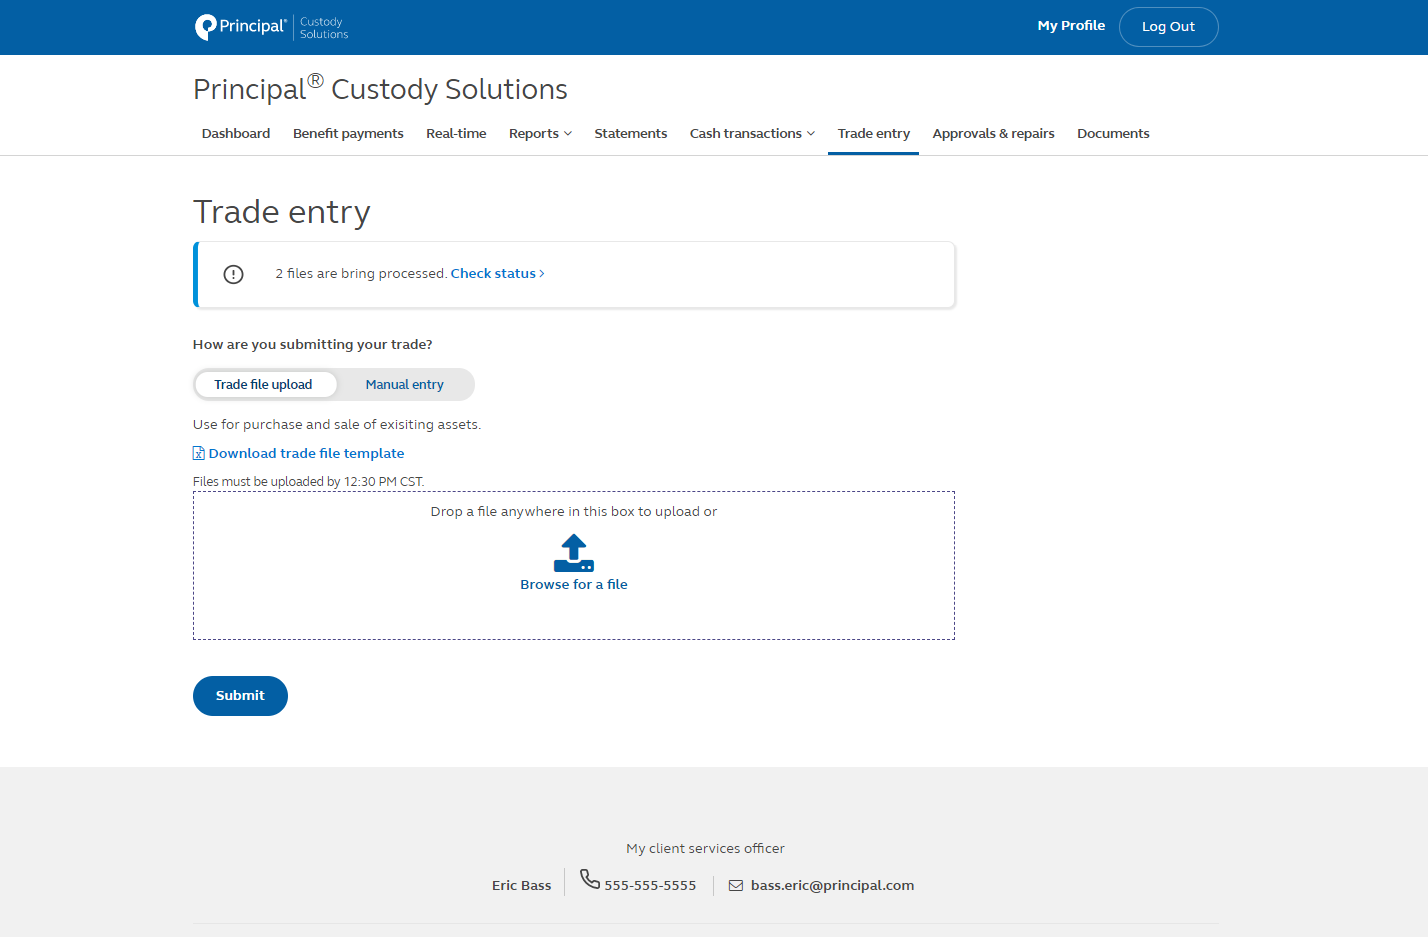 Account view of trade entry information within a custodial account.